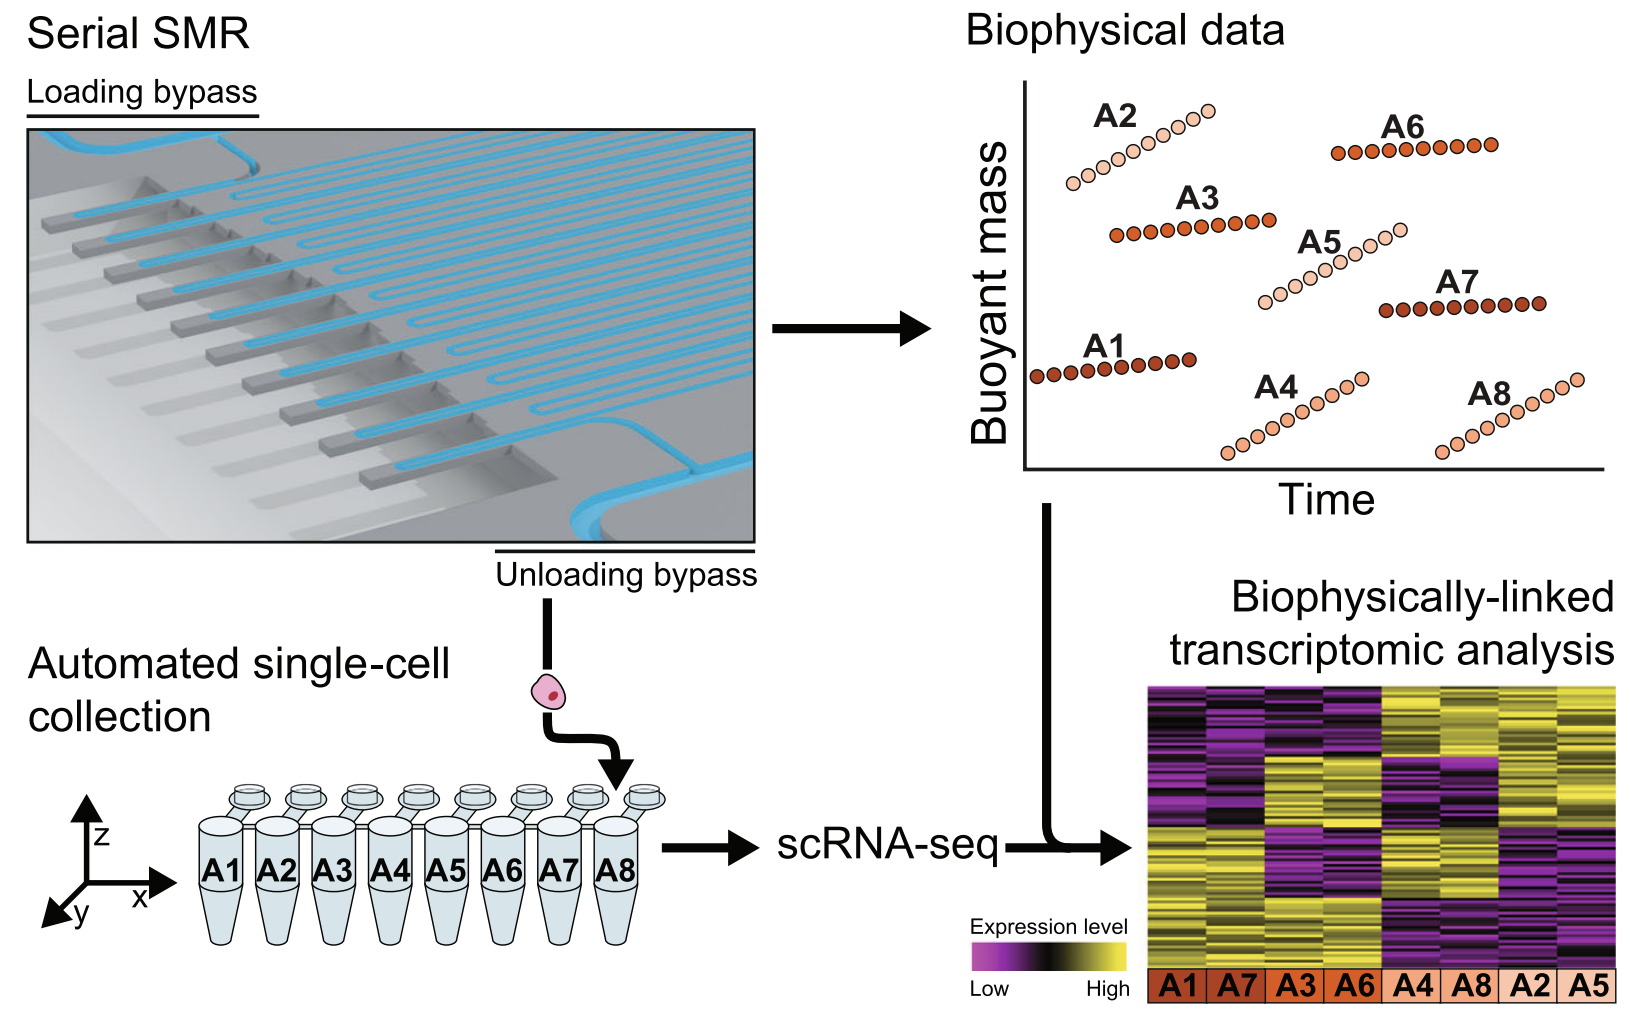 Linking single-cell measurements of mass, growth rate, and gene expression